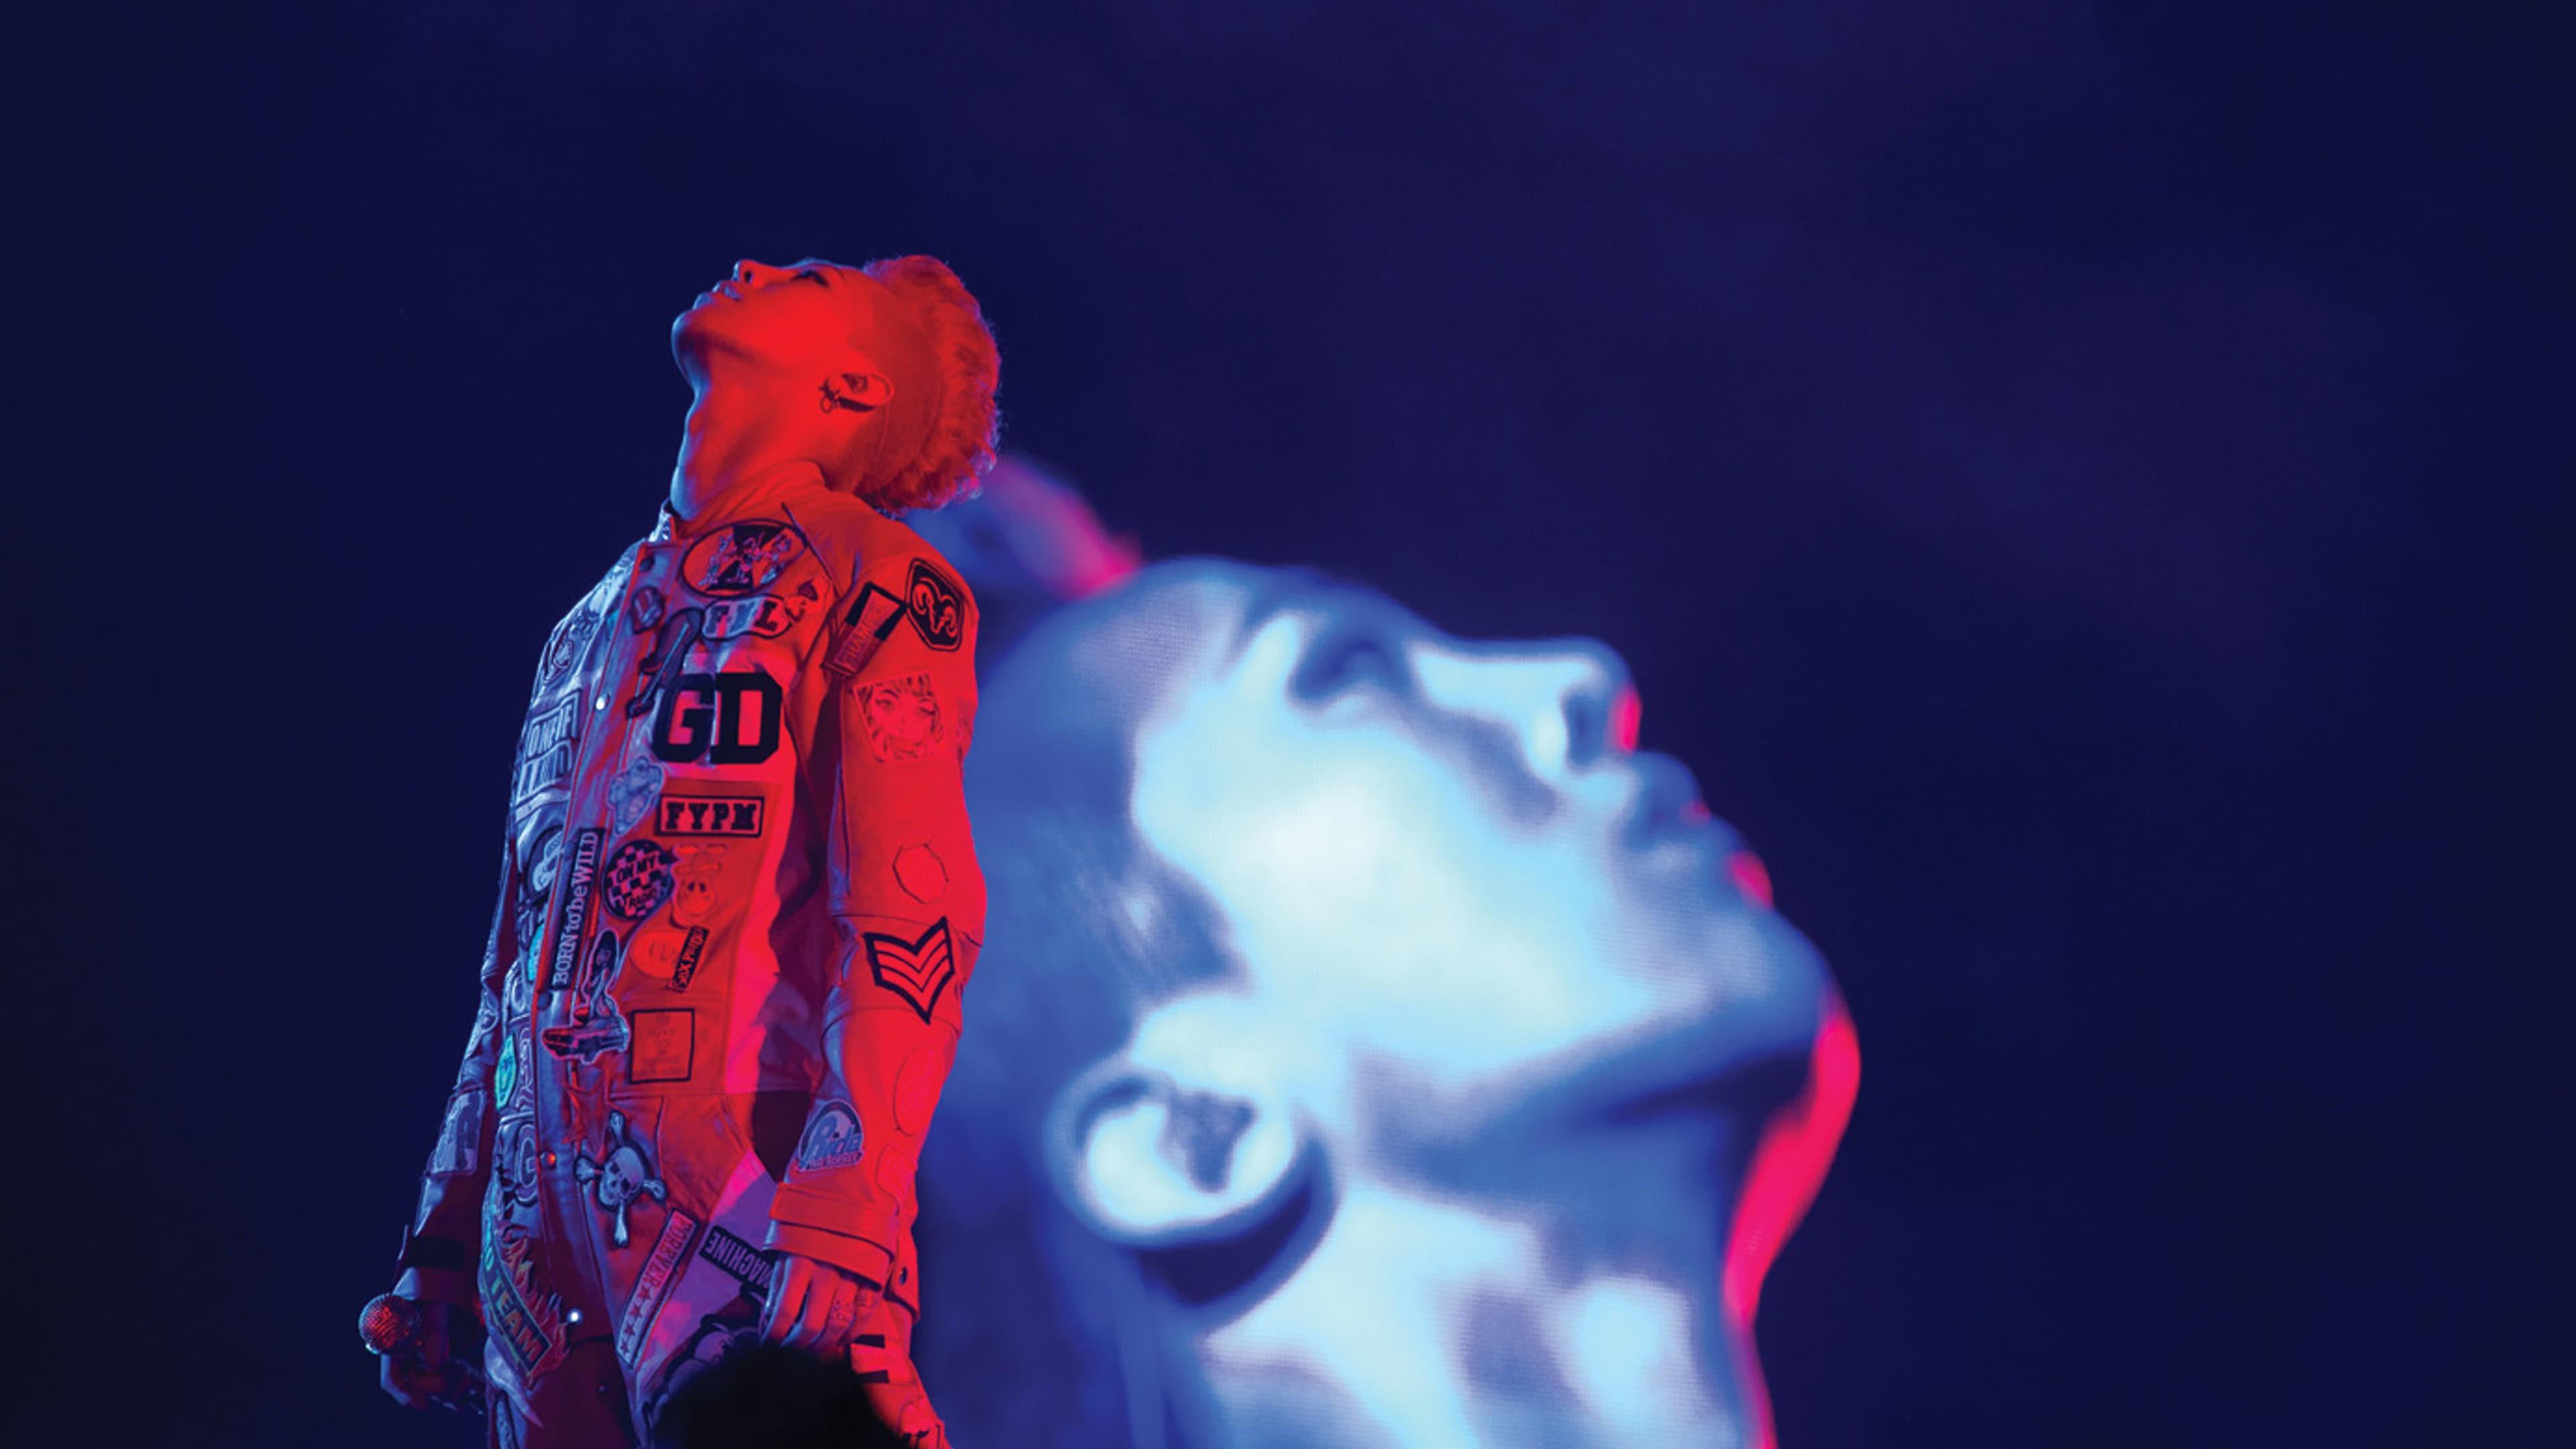 One Of a Kind 3D ; G-DRAGON 2013 1ST WORLD TOUR backdrop